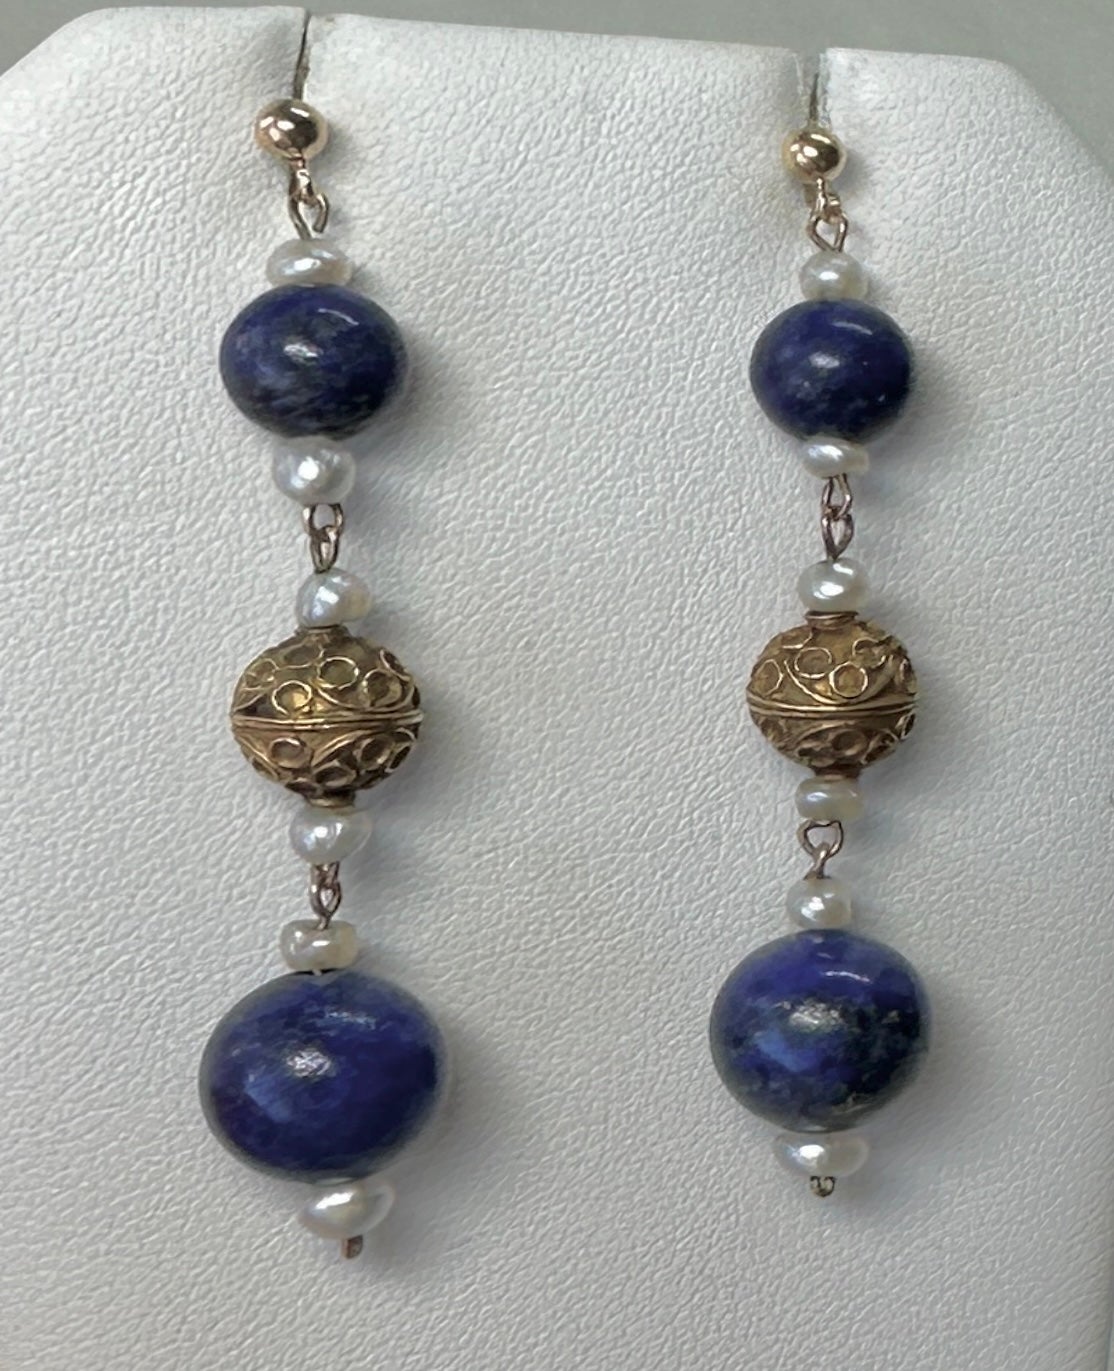 This is a spectacular pair of Antique Etruscan Revival Pendant Dangle Drop Earrings with 18 Karat Etruscan Gold beads, Lapis Lazuli Beads and Pearls.  The earrings have extraordinary early Etruscan beaded scroll and granulation work on the gold